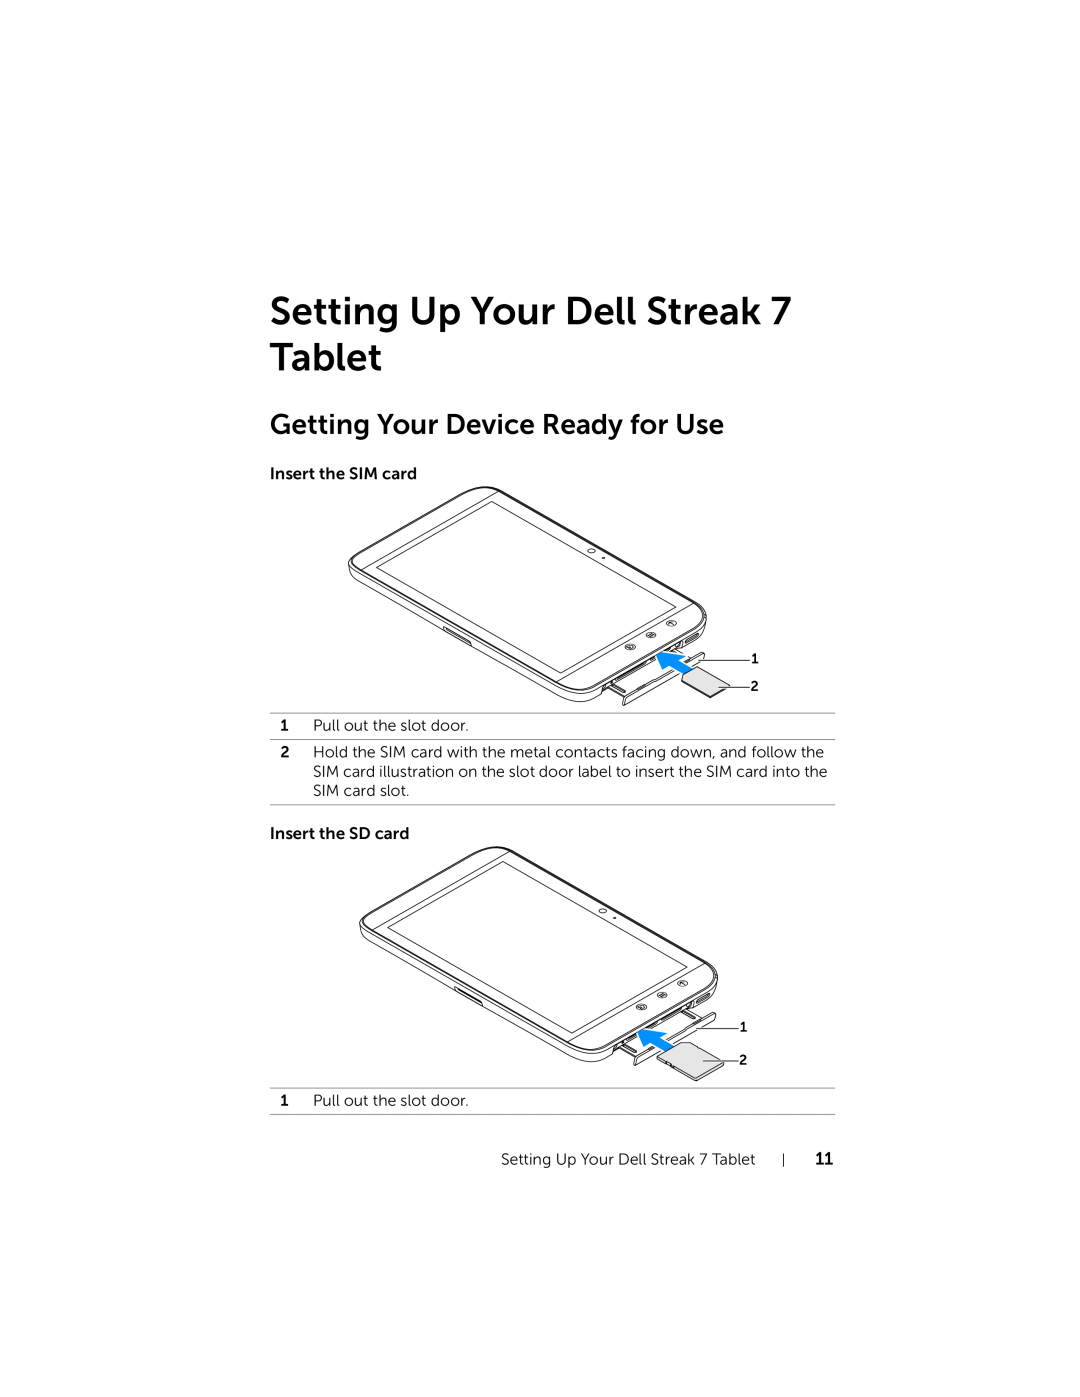 Dell user manual Setting Up Your Dell Streak 7 Tablet, Getting Your Device Ready for Use 